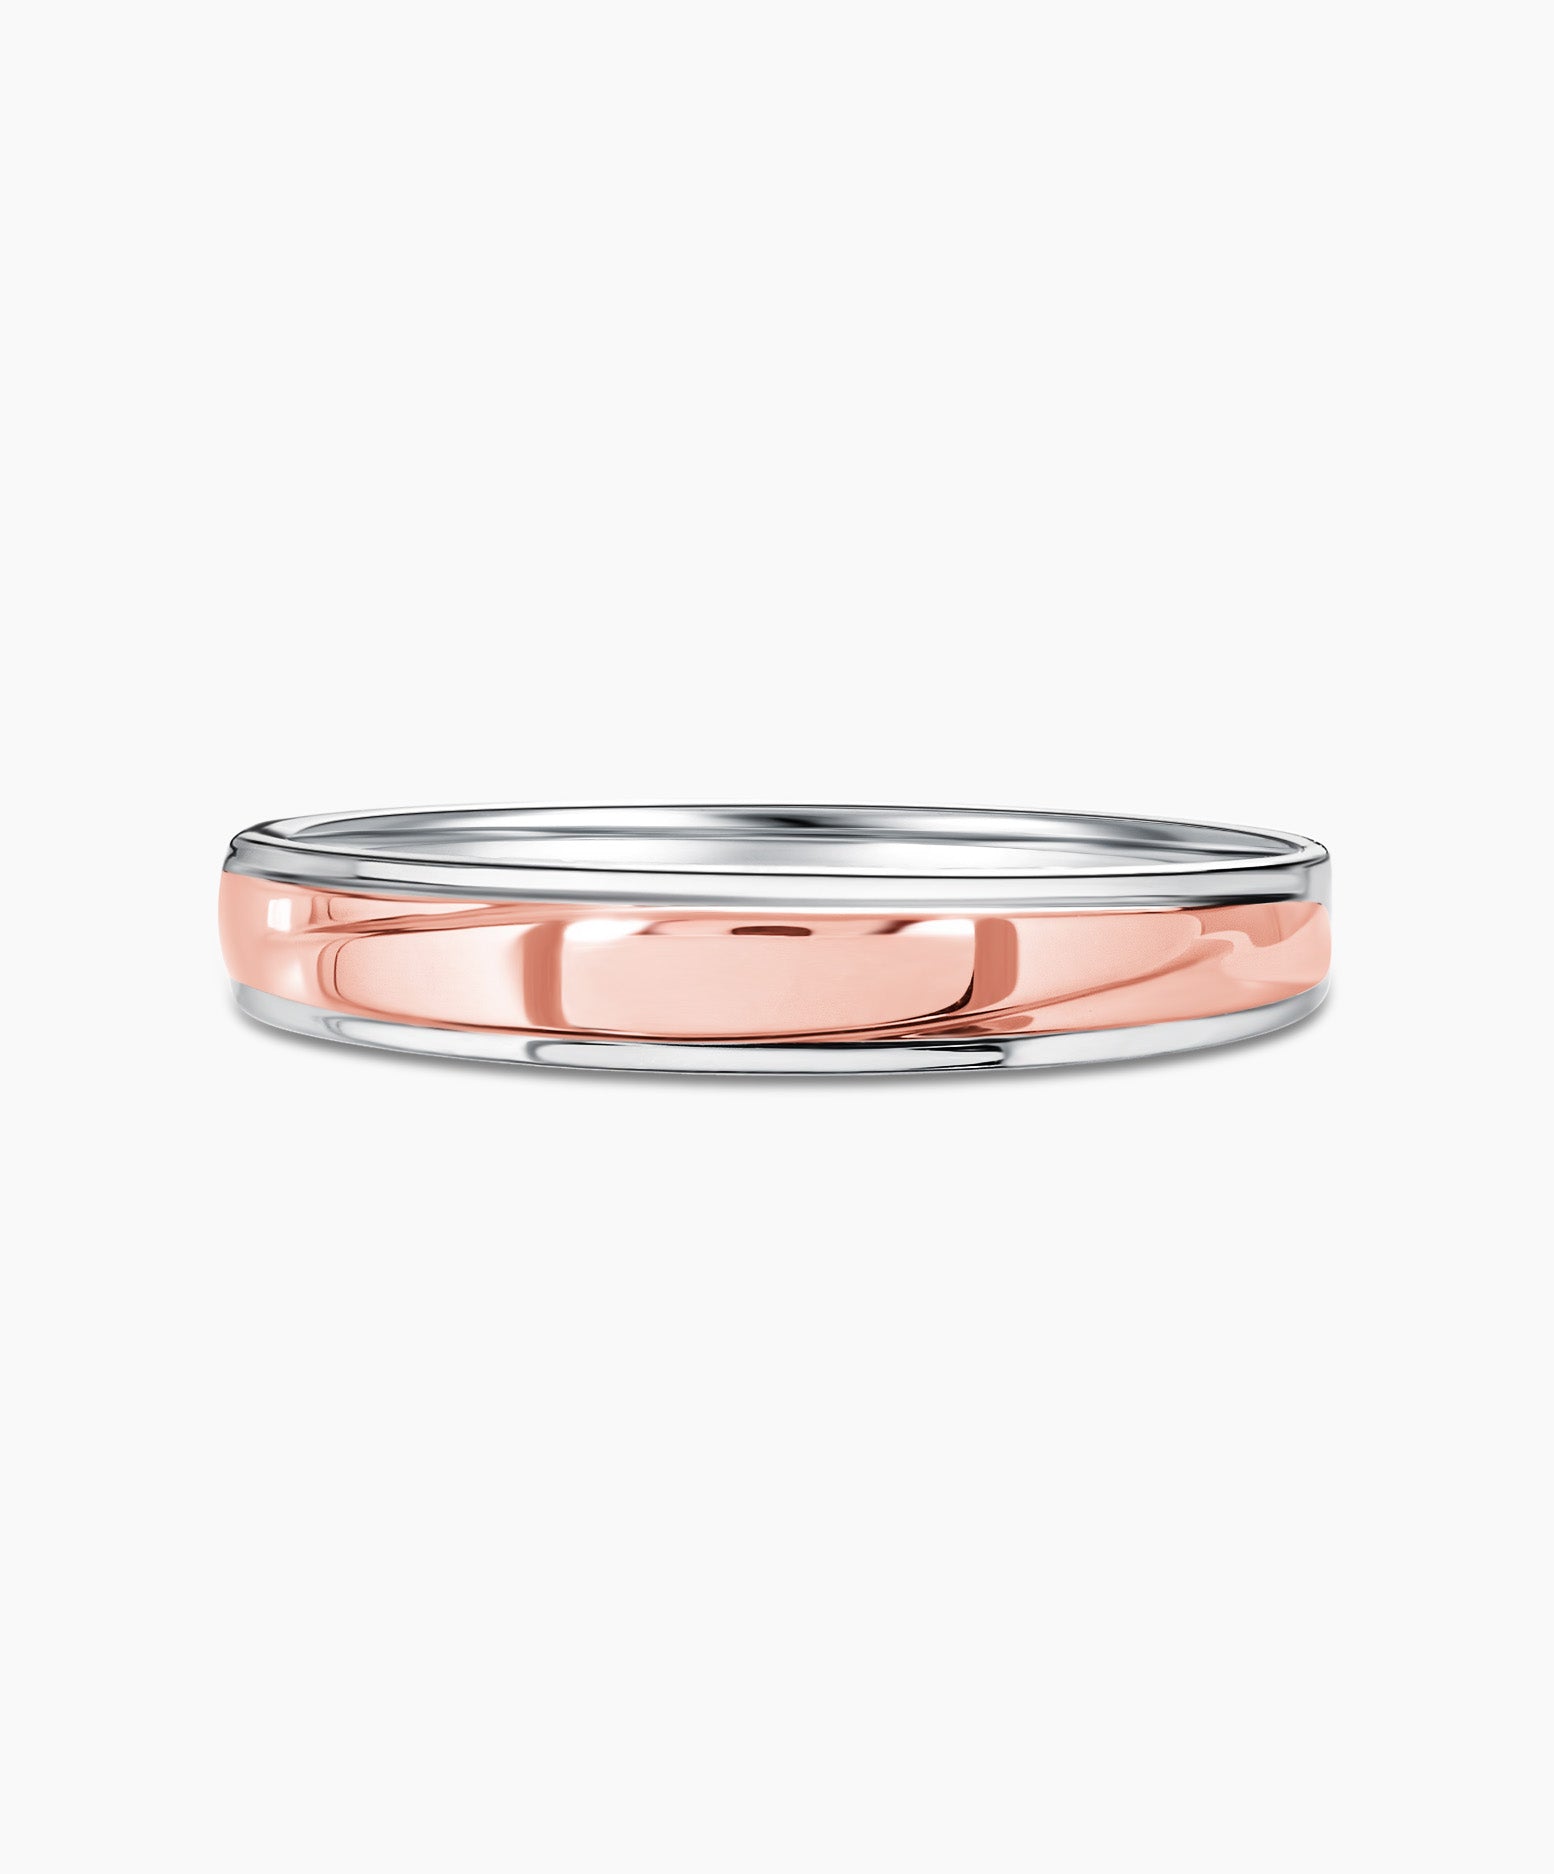 LVC Tresor Wedding Band in White Gold with Rose Gold Band